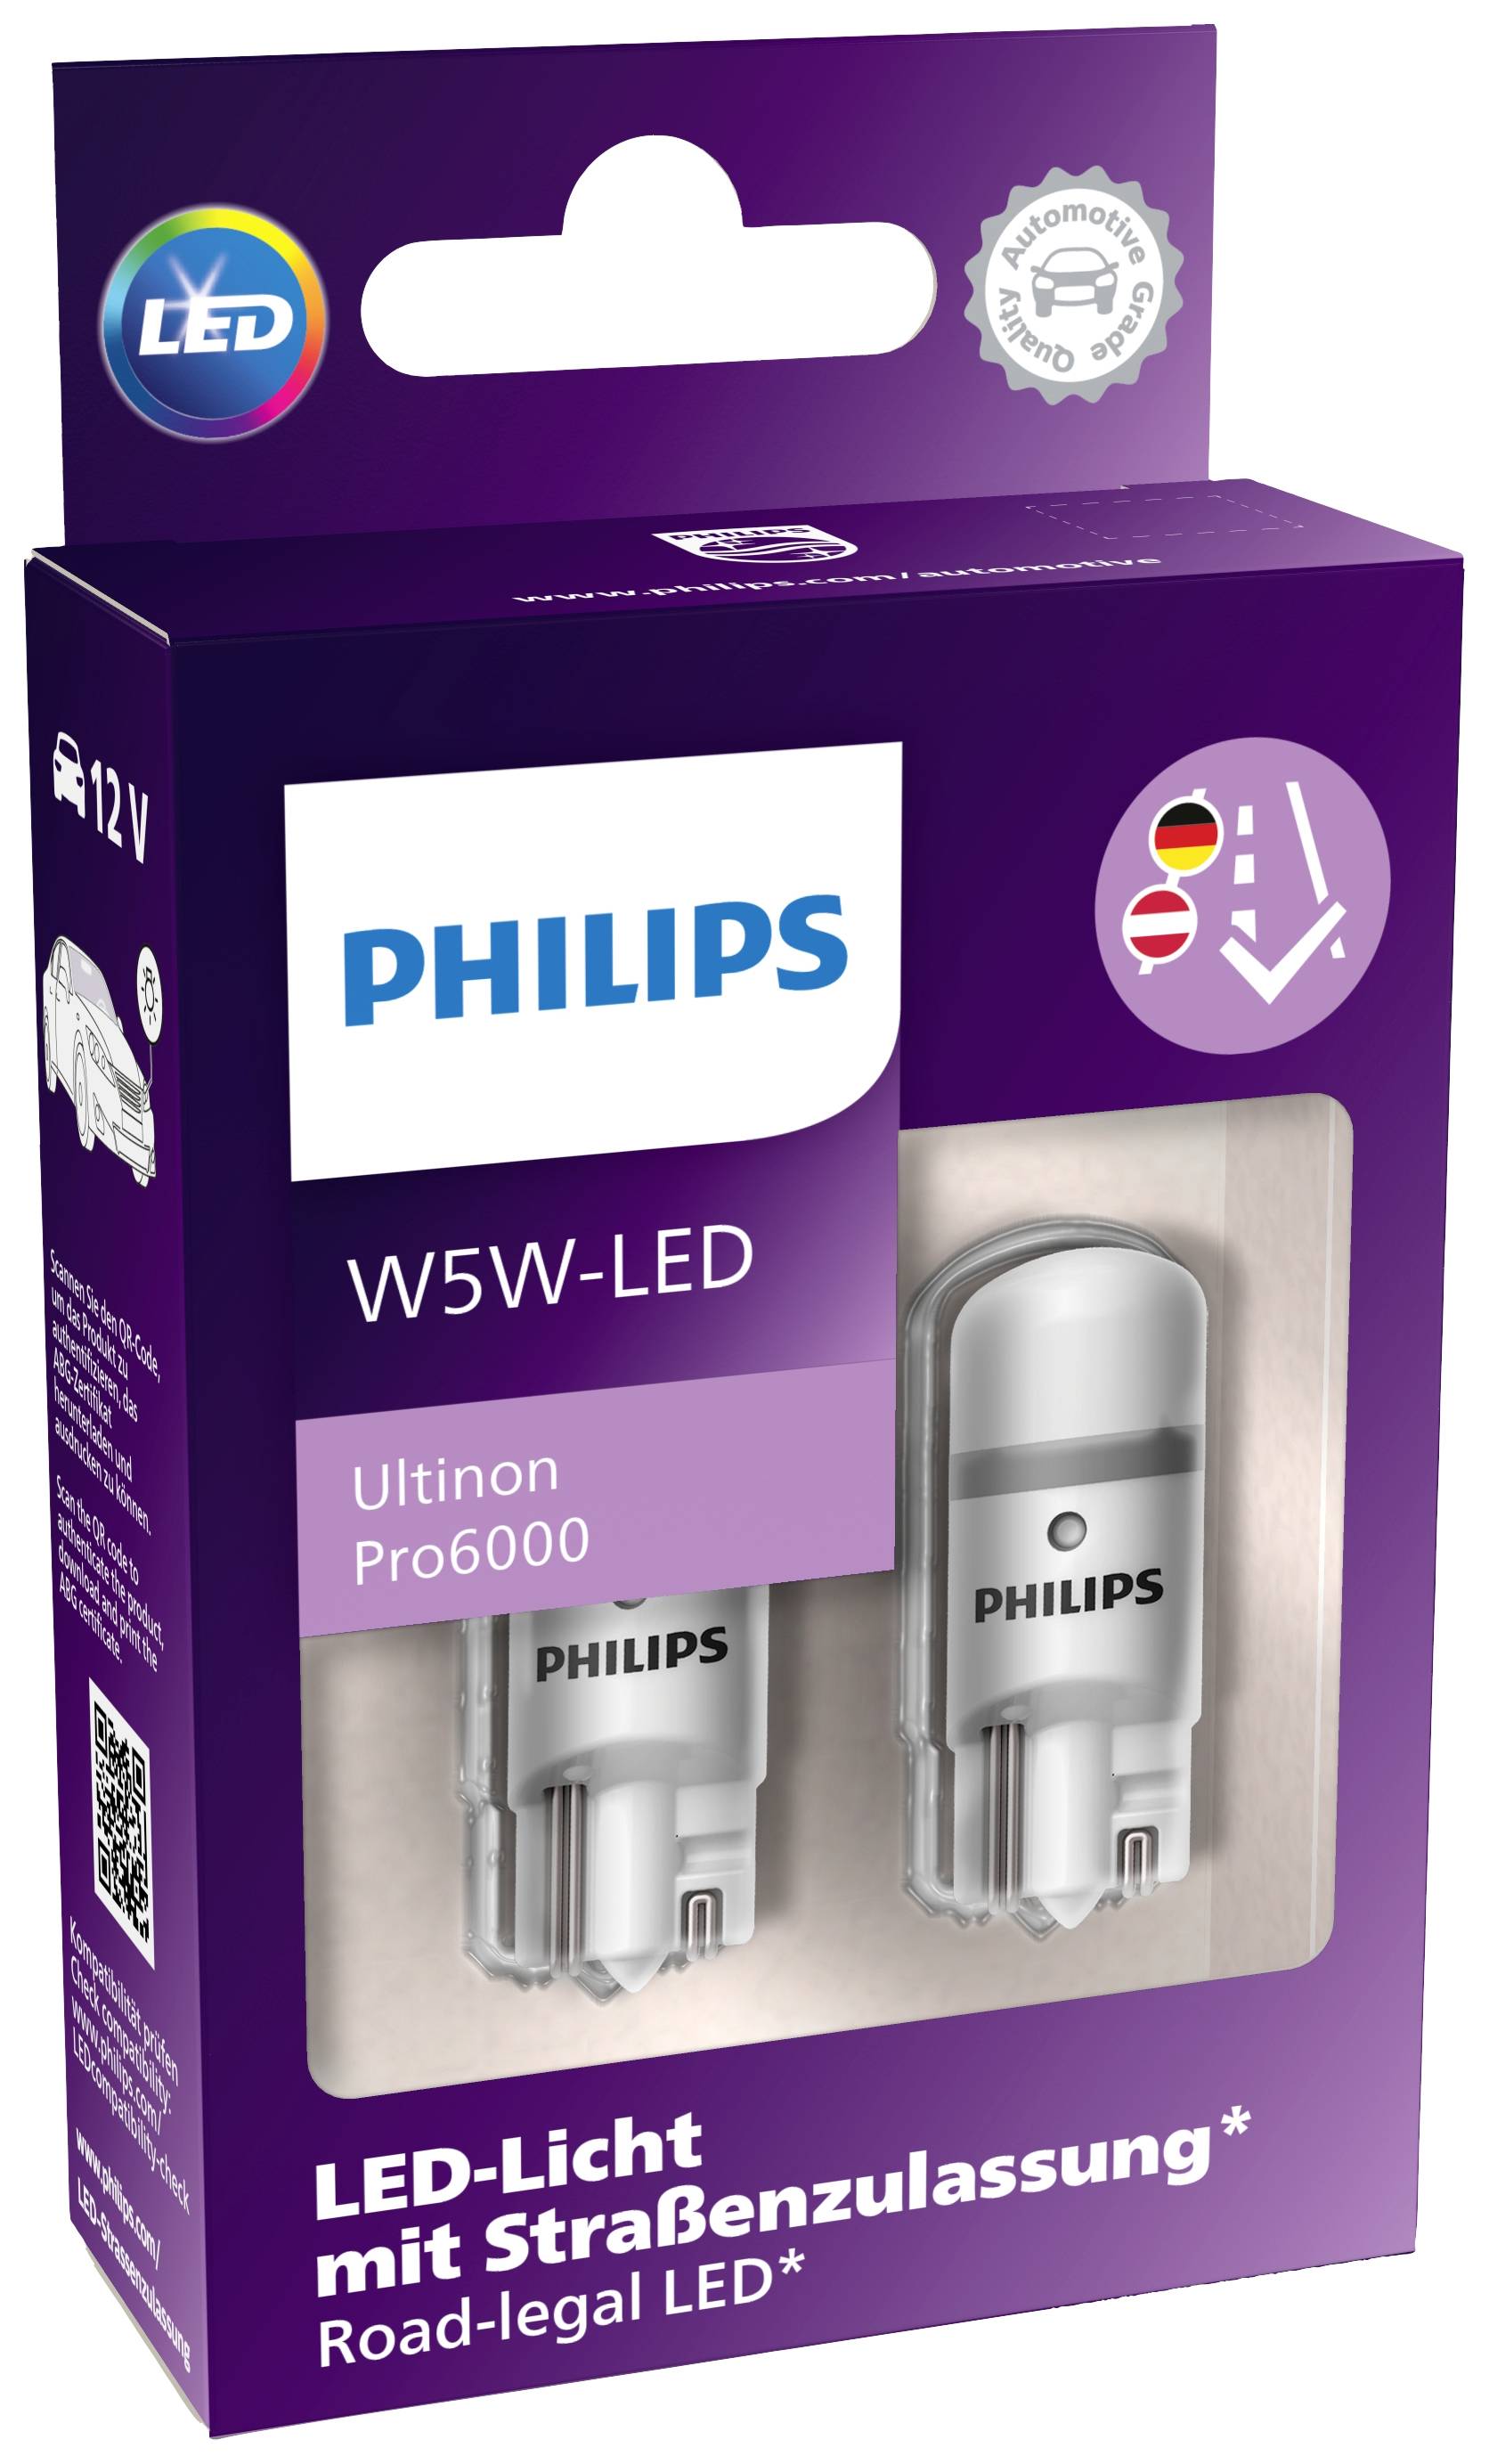 Philips Ultinon Pro6000 W5W LED with Road Approval * 6000K